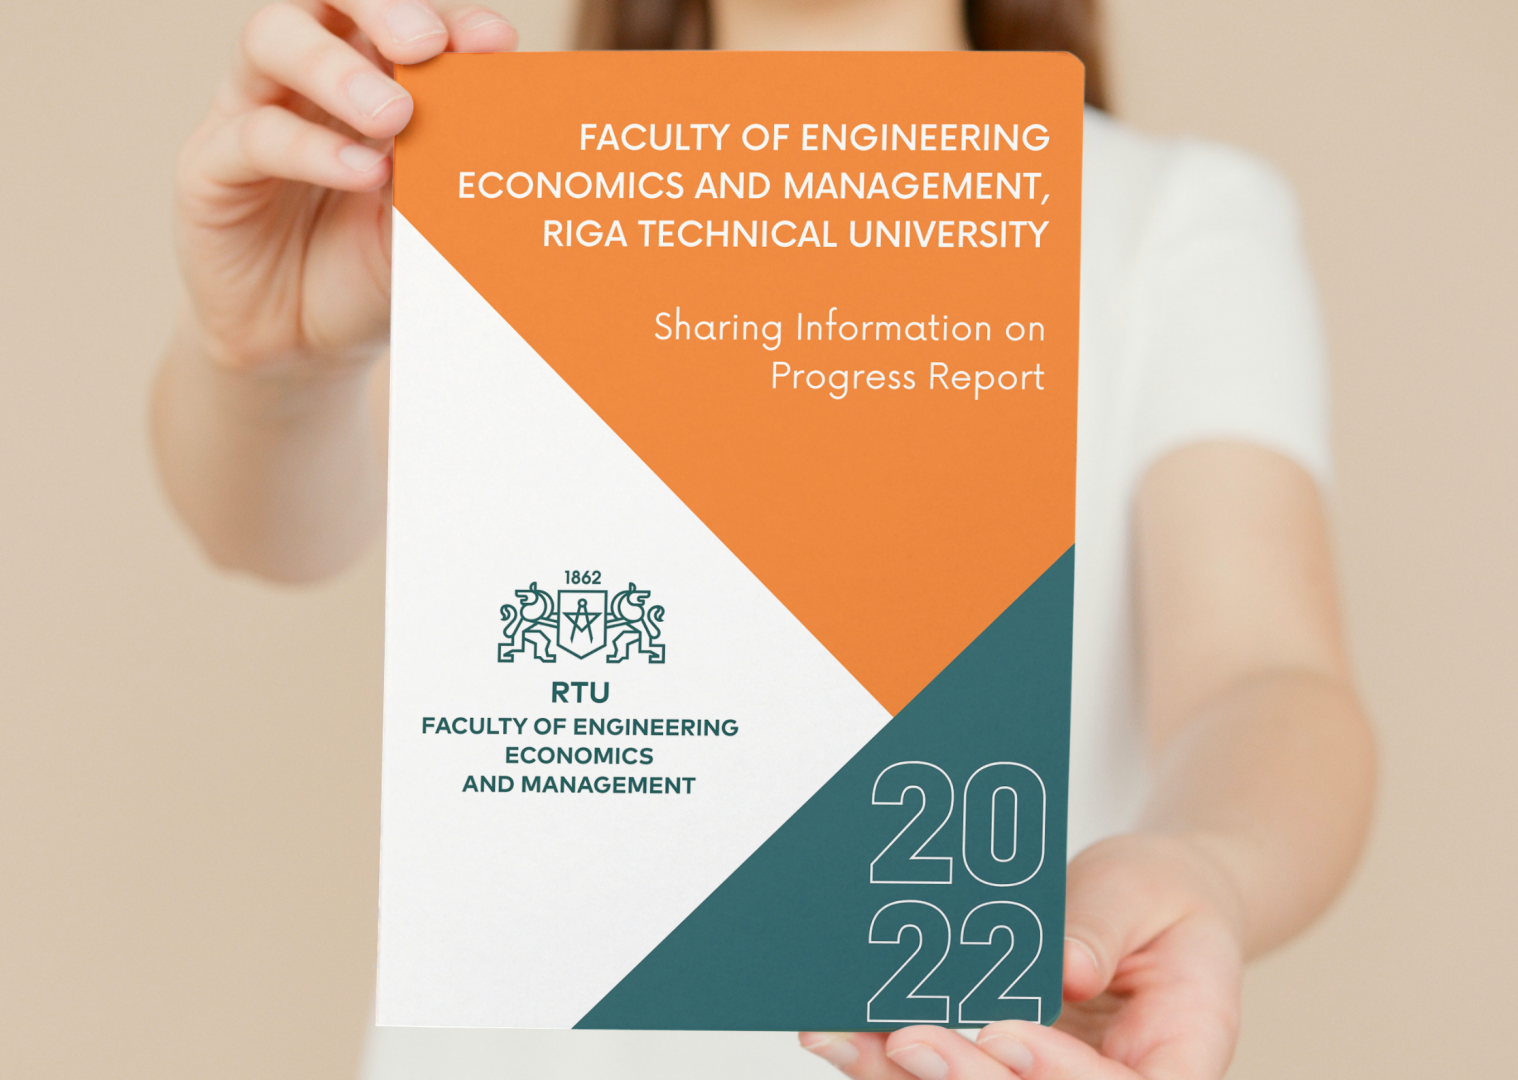 The new FEEM PRME report has been published